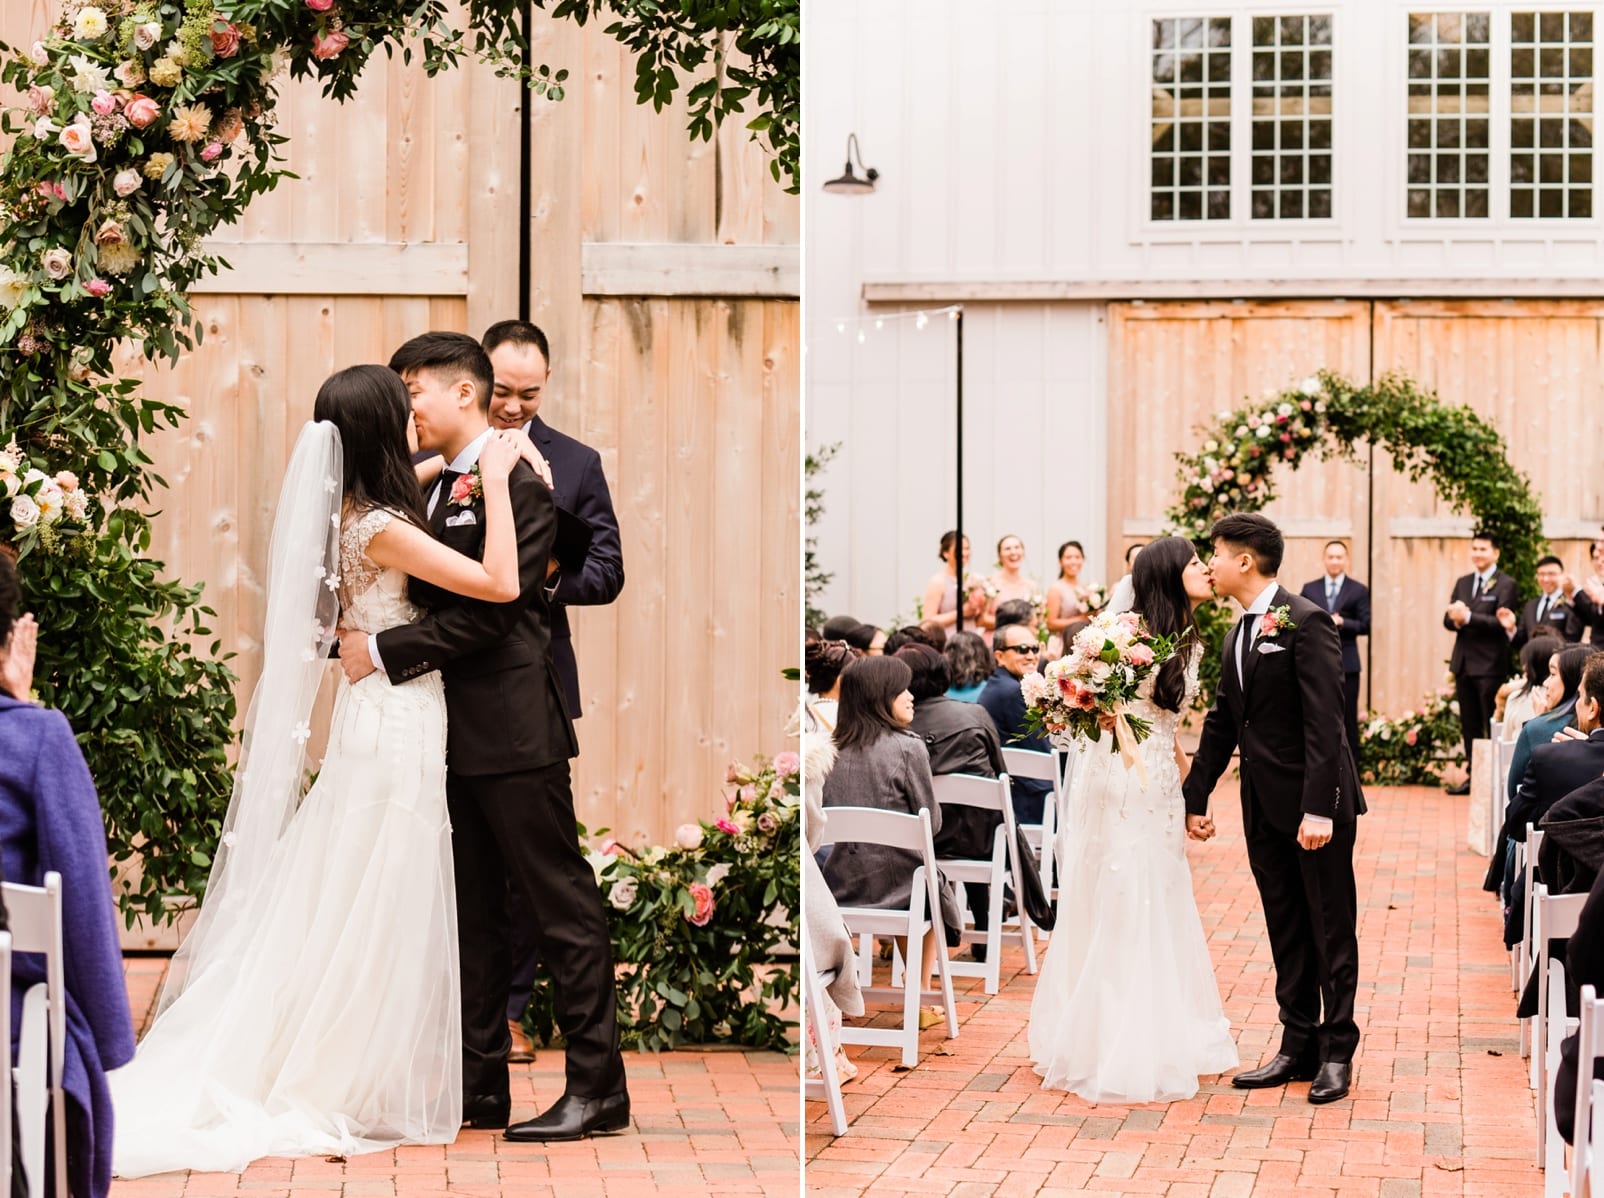 Barn of Chapel Hill bride and groom first kiss photo